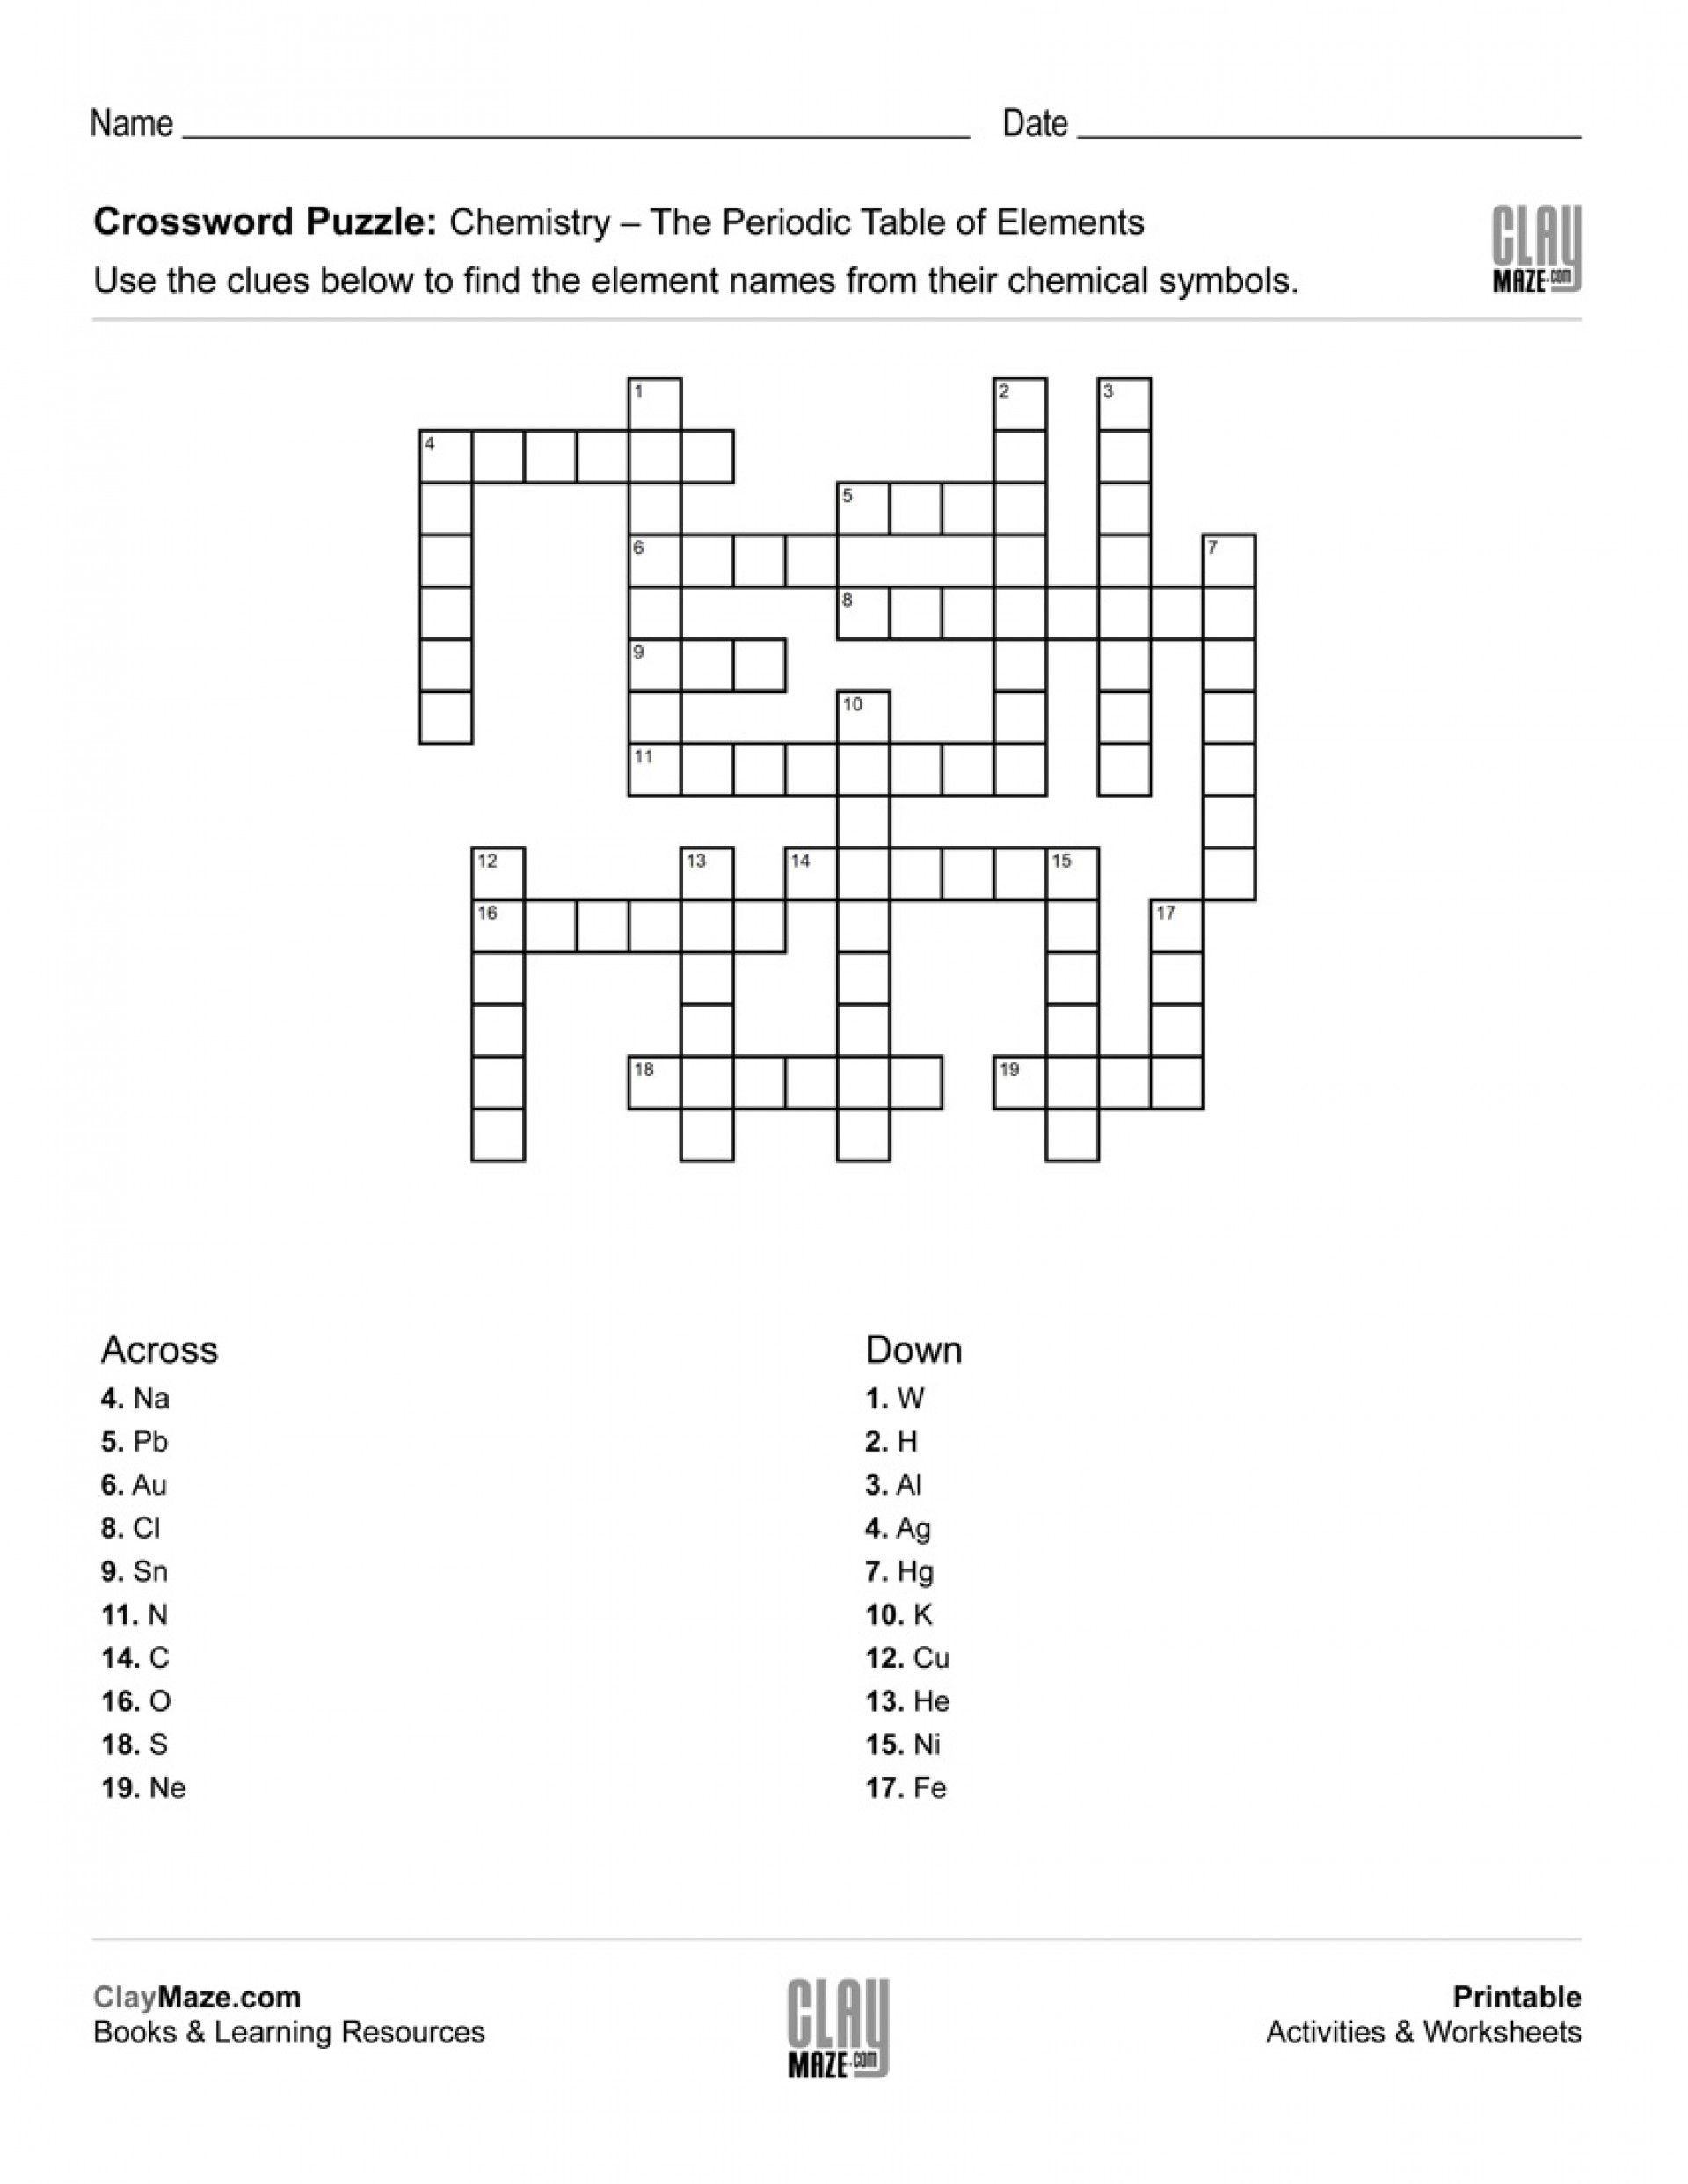 Atoms and Elements Worksheet atoms and Periodic Table Crossword Puzzle Answers